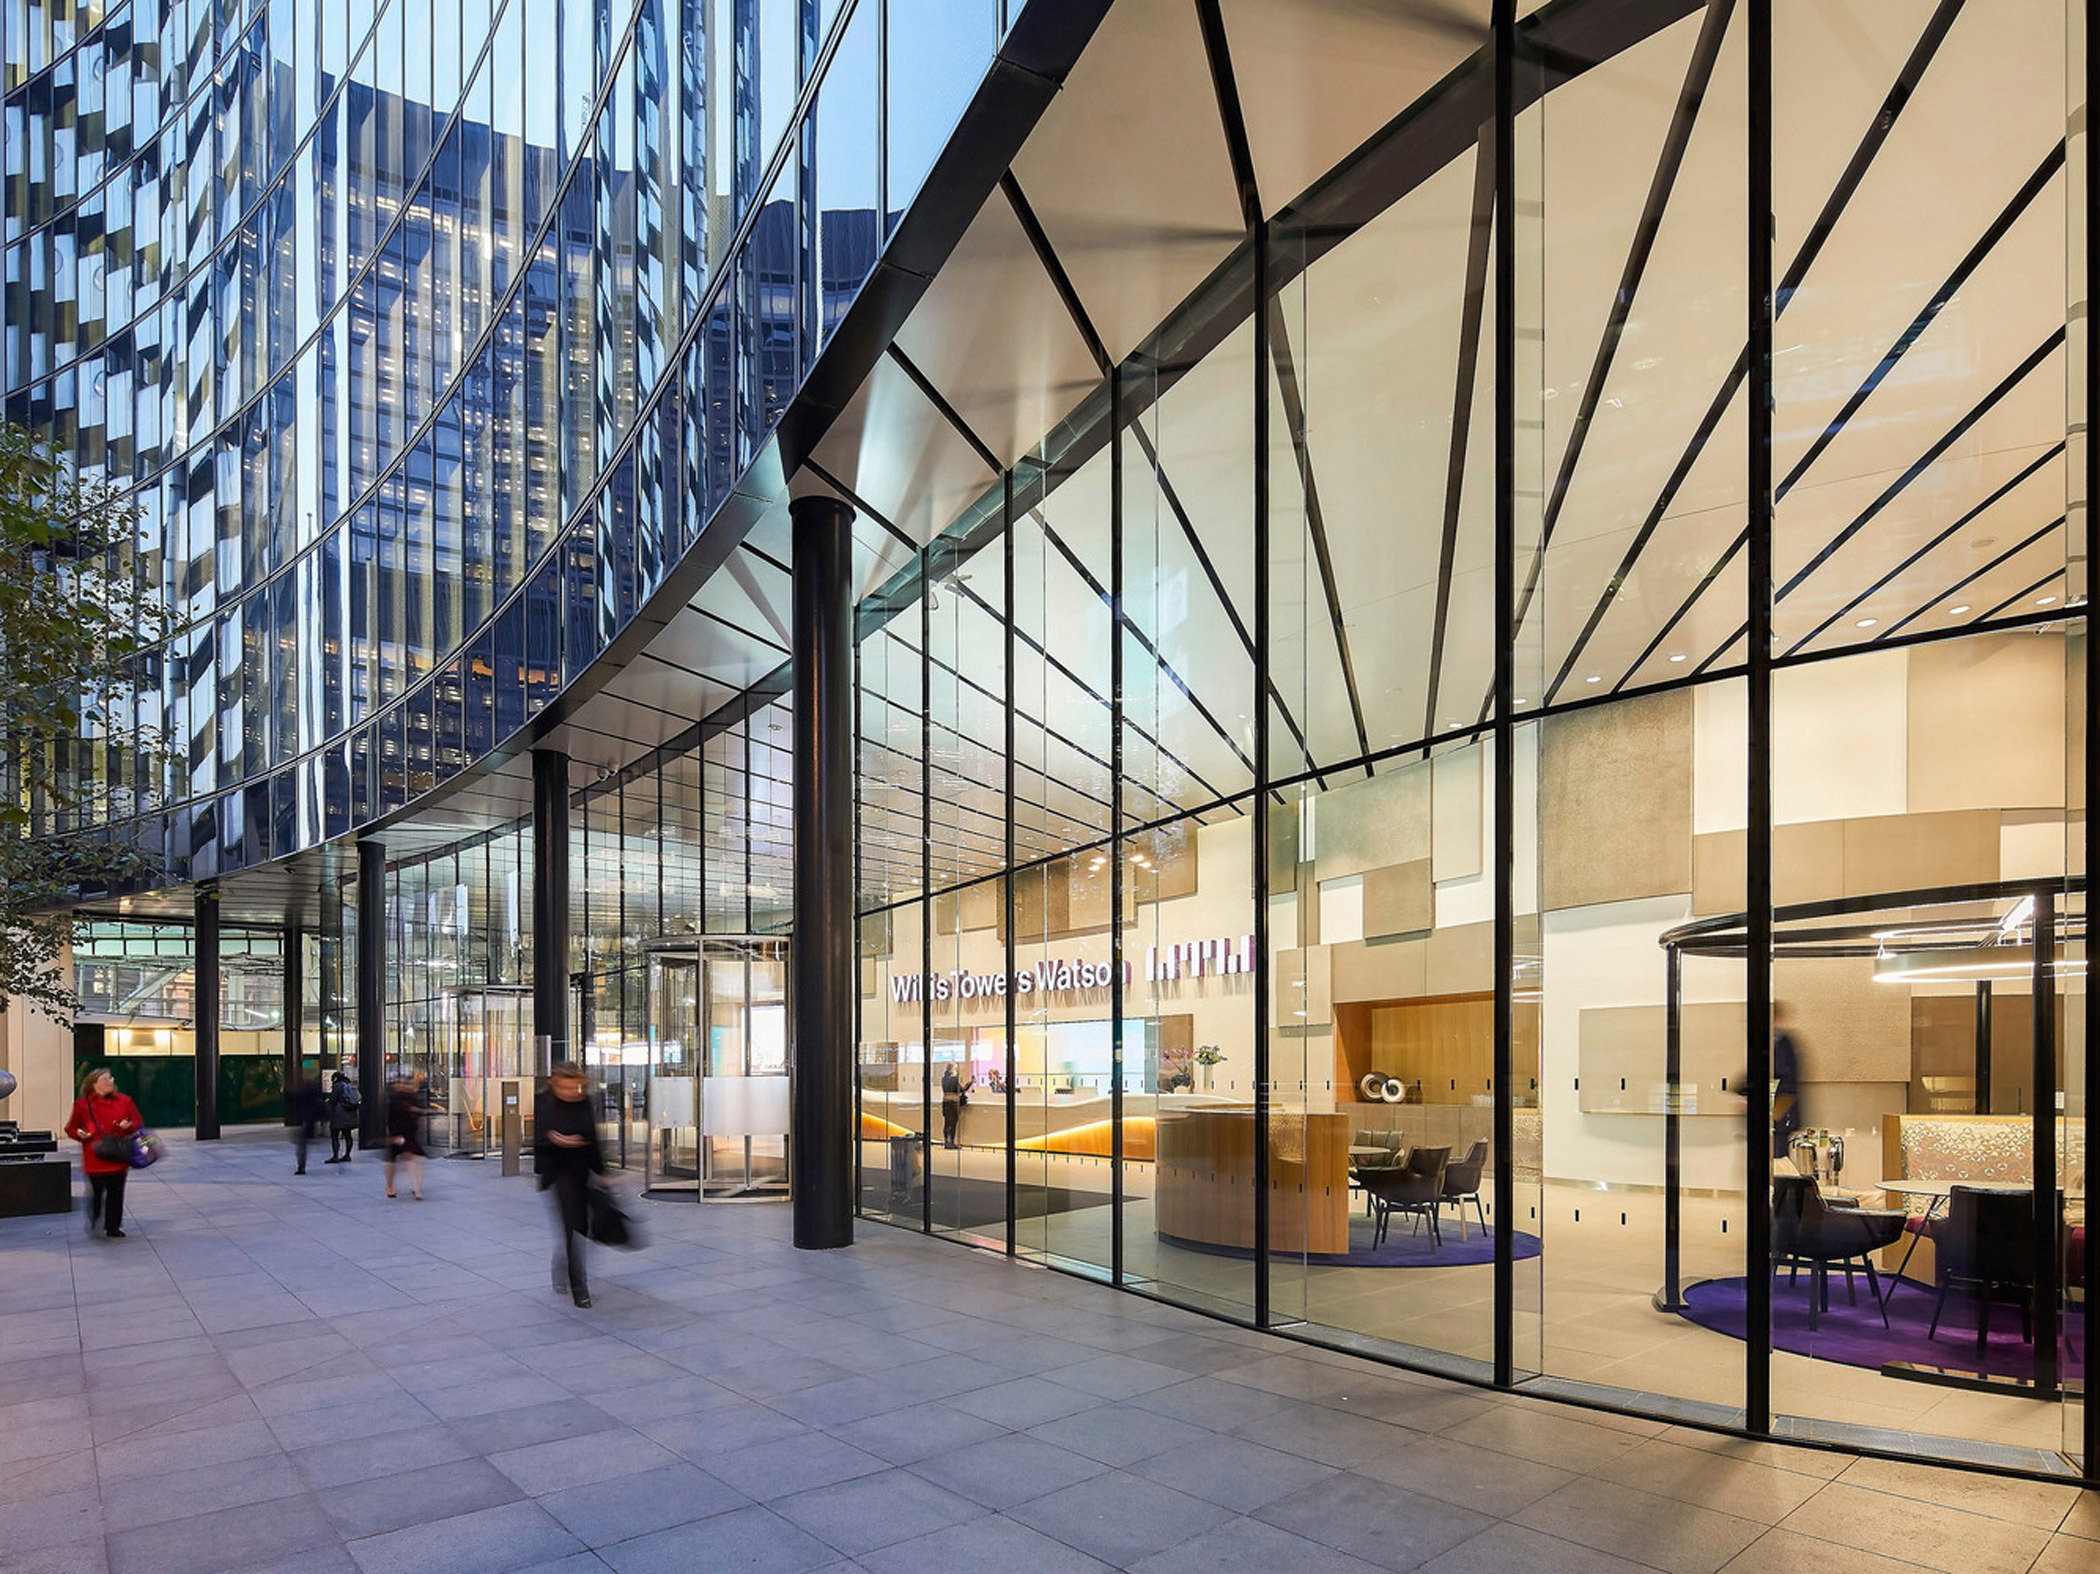 Modern commercial building interior visible through floor-to-ceiling glass facade; sleek design featuring natural stone walls, minimalist furniture with pops of purple accents, and warm lighting enhancing an inviting, open-plan layout.